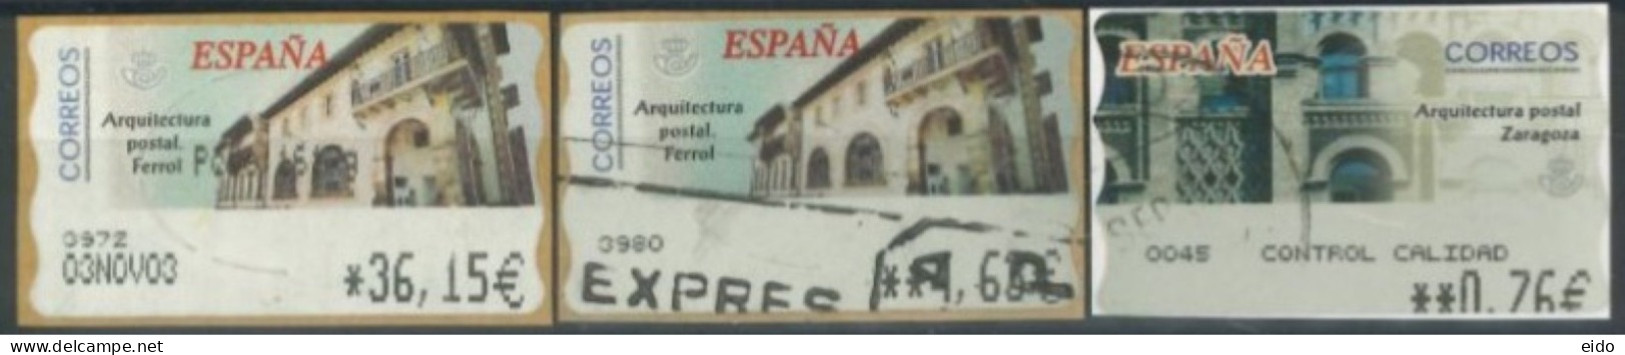 SPAIN - 2003 - POSTAL ARCHITECTURE FERROL & ZARAGOZA STAMPS LABELS SET OF 3 OF DIFFERENT VALUES, USED . - Used Stamps